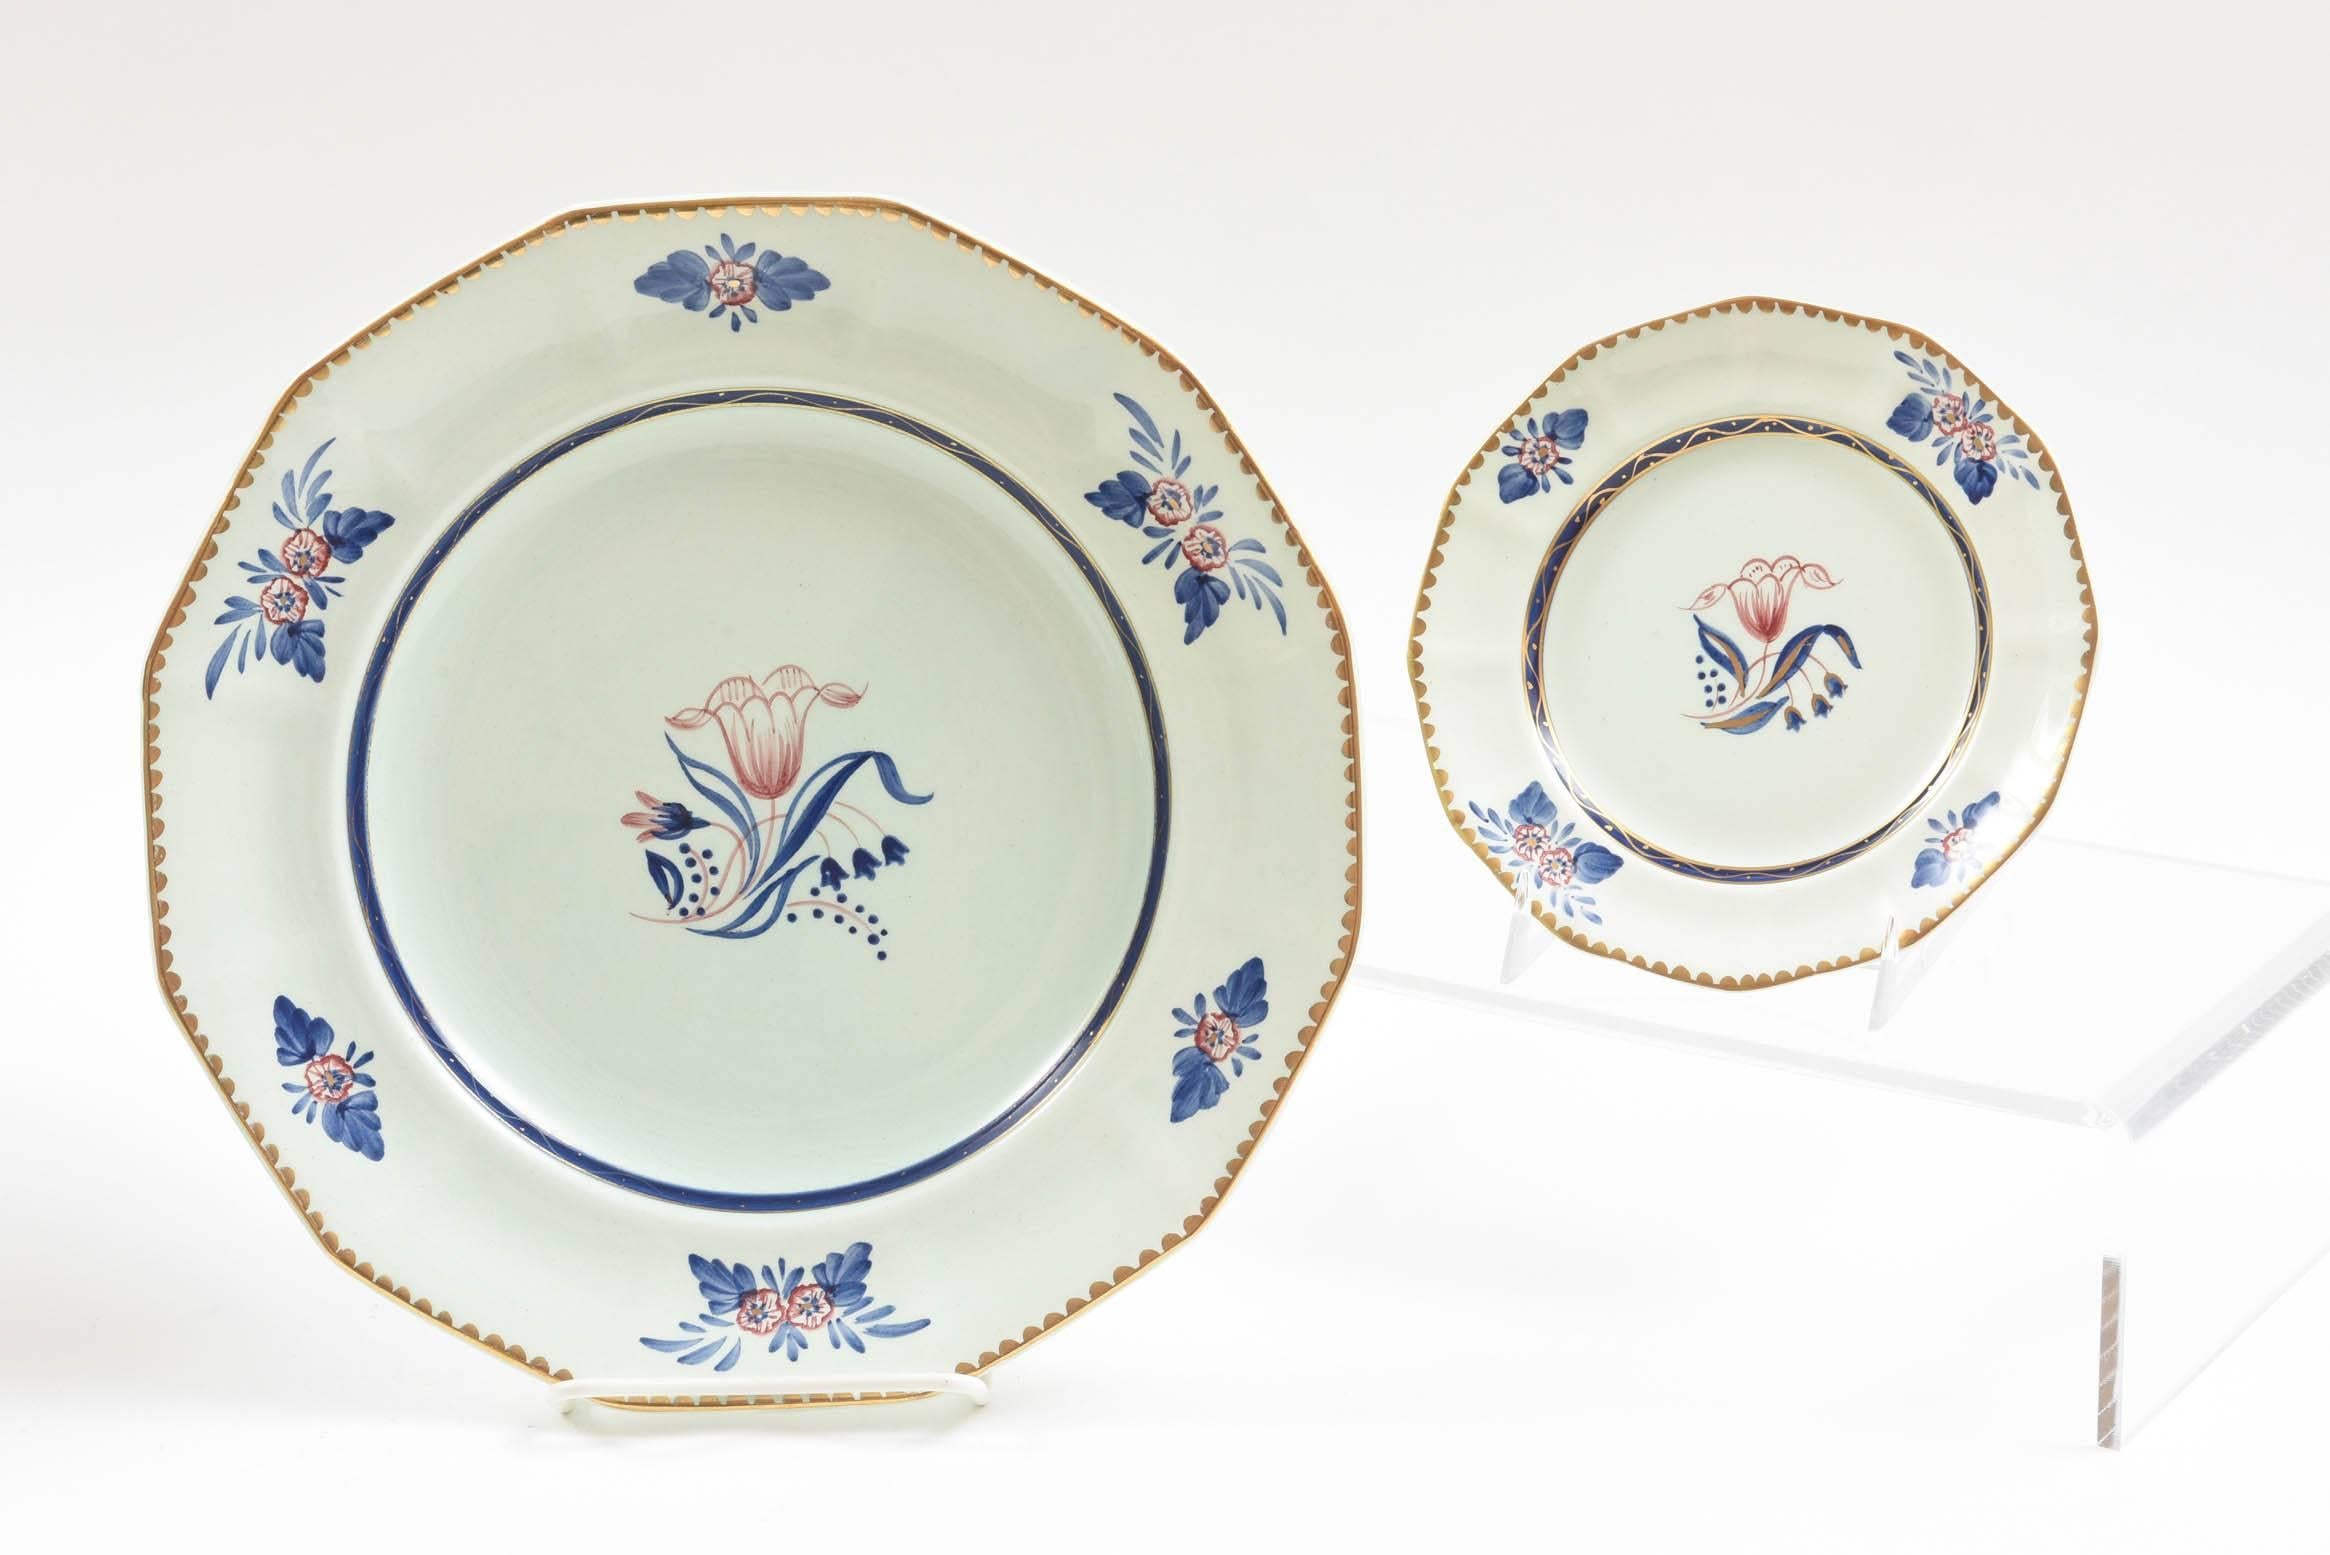 A charming pattern popular at the turn of the last century by Adams, England. The firm was well known for producing decorative earthenware with a soft aqua background and charming hand painted details on a nicely shaped blank. Great for more casual